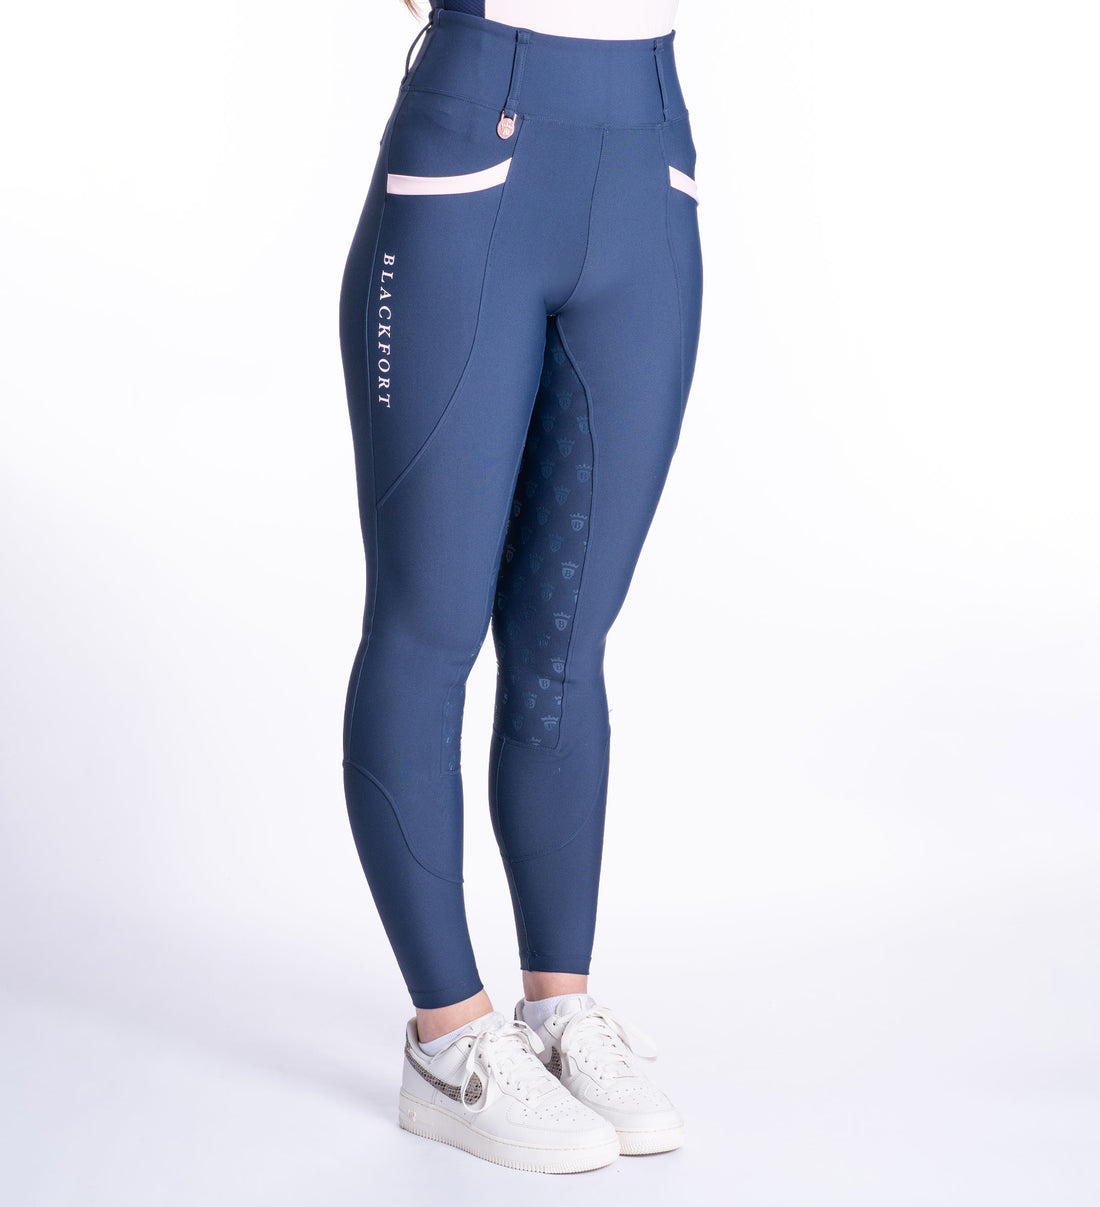 Ladies Leggings – The Cally Collection